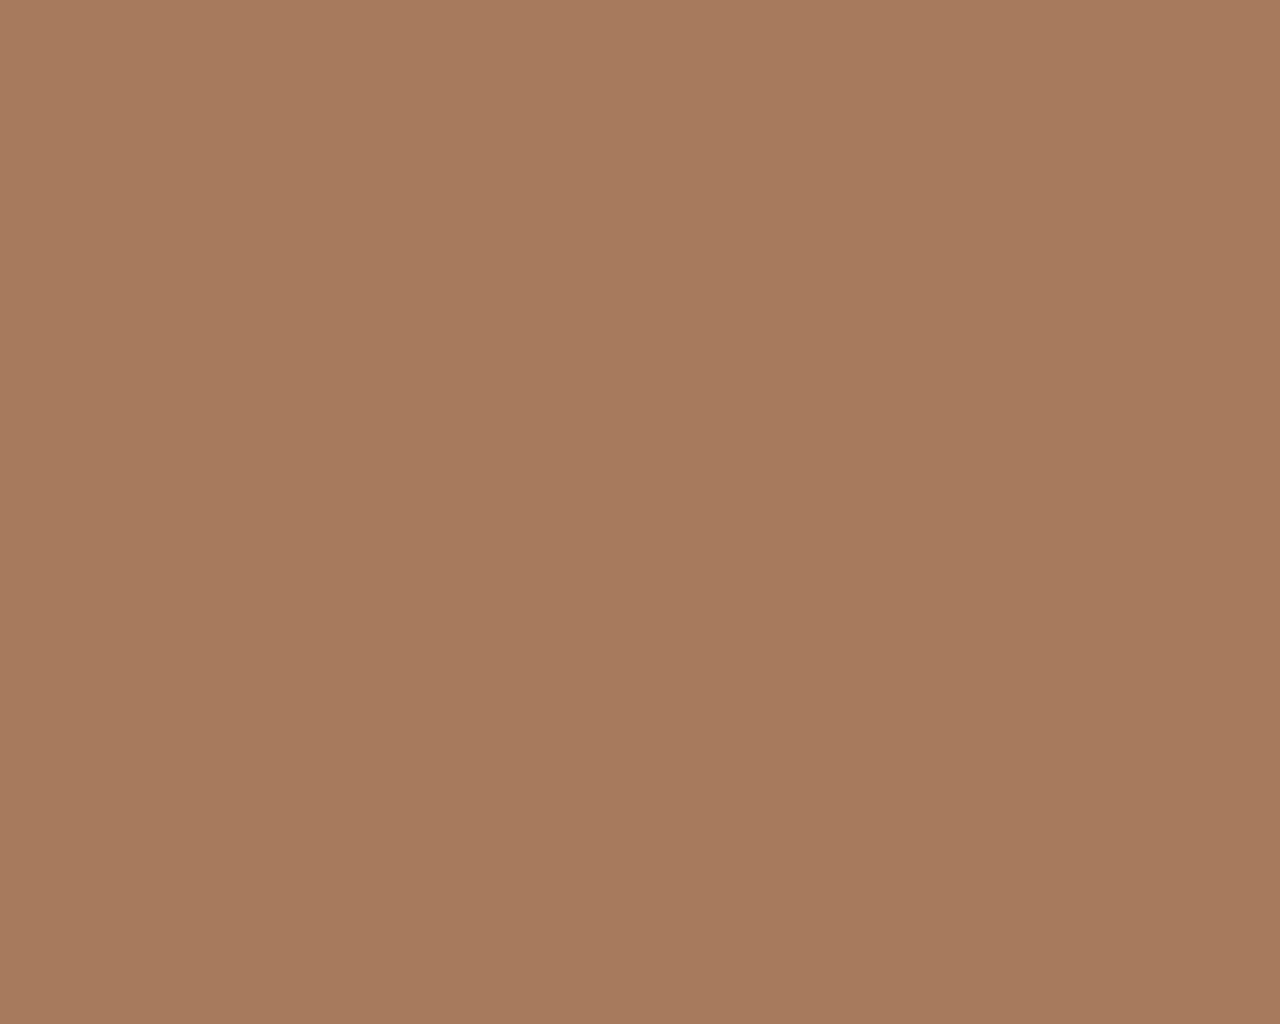 1280x1024 Tuscan Tan Solid Color Background